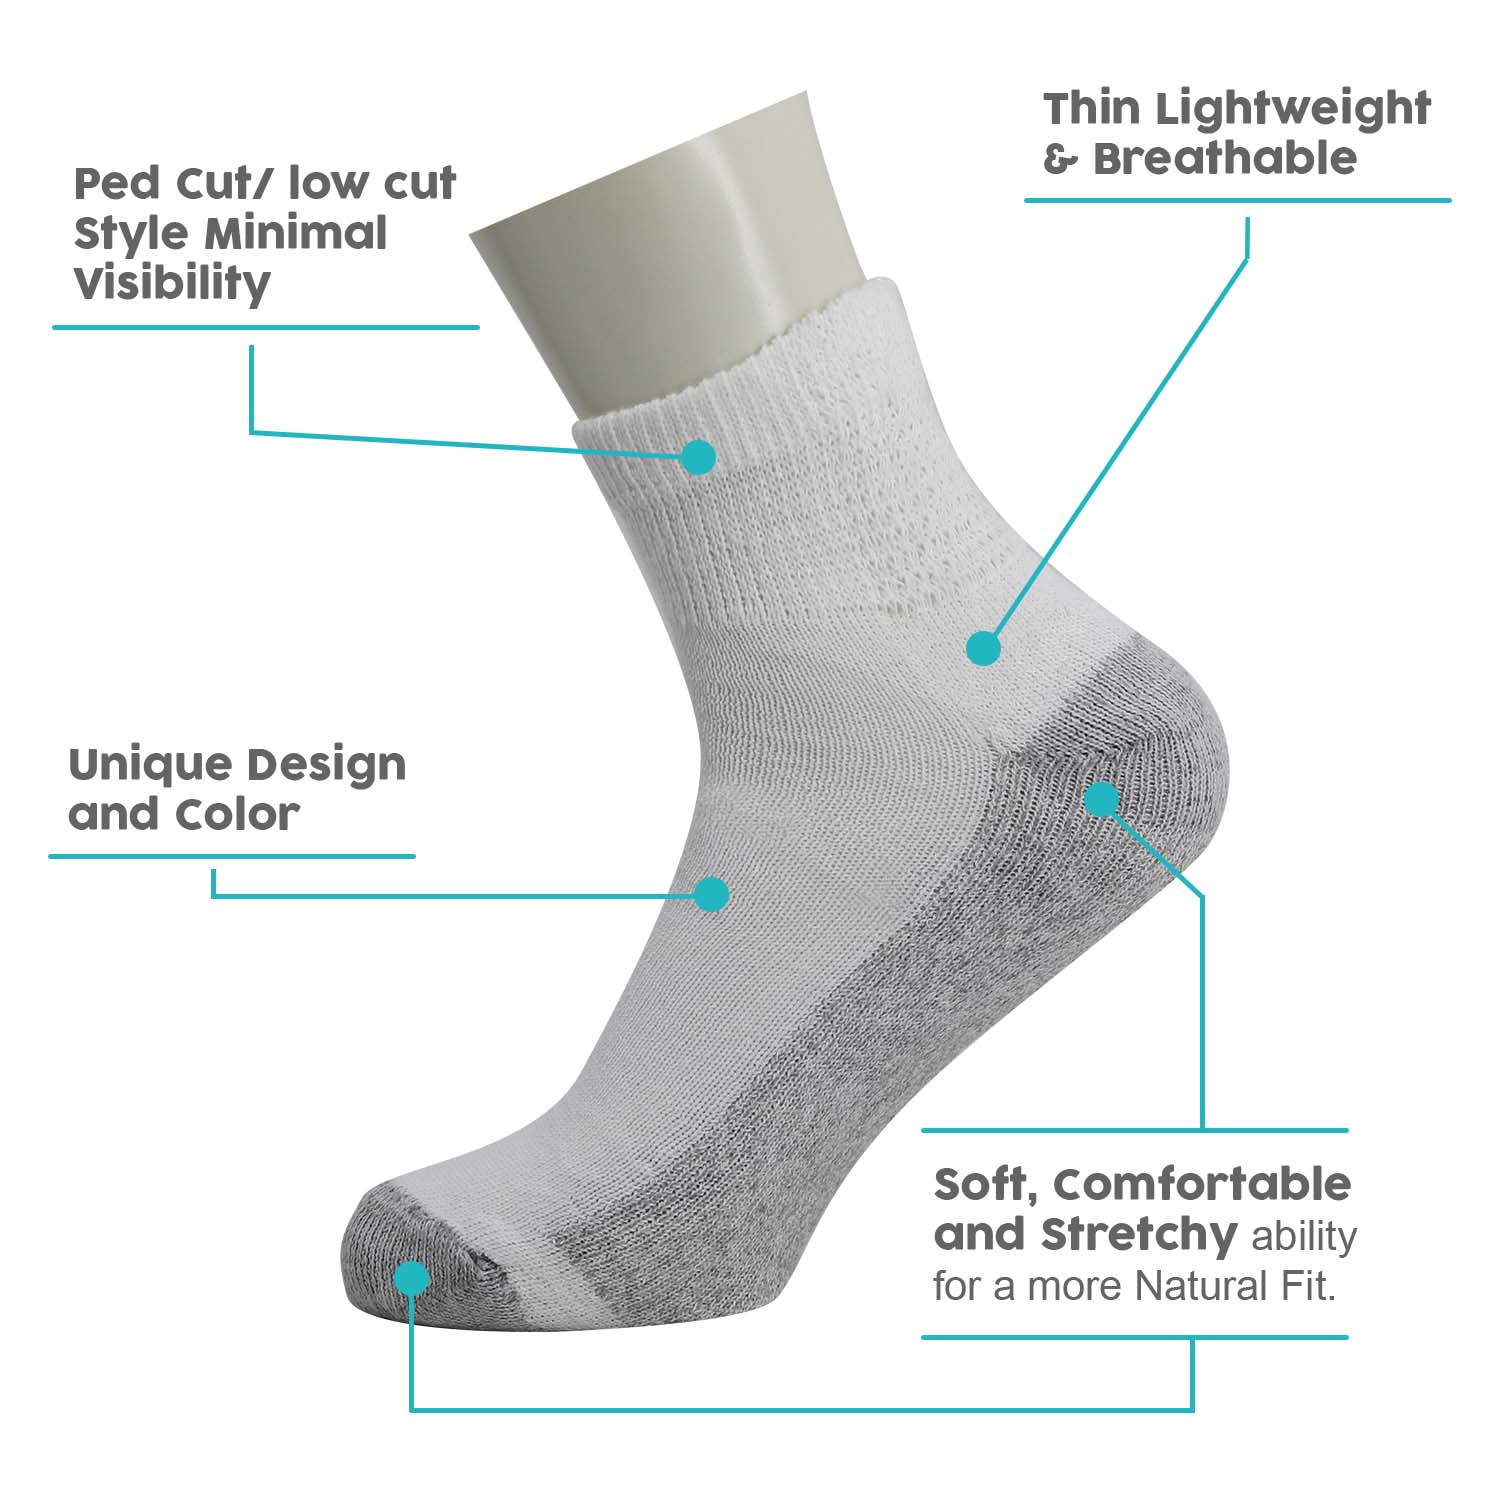 Unisex Ankle Wholesale Sock, Size 10-13 in White with Grey - Bulk Case of 180 Pairs